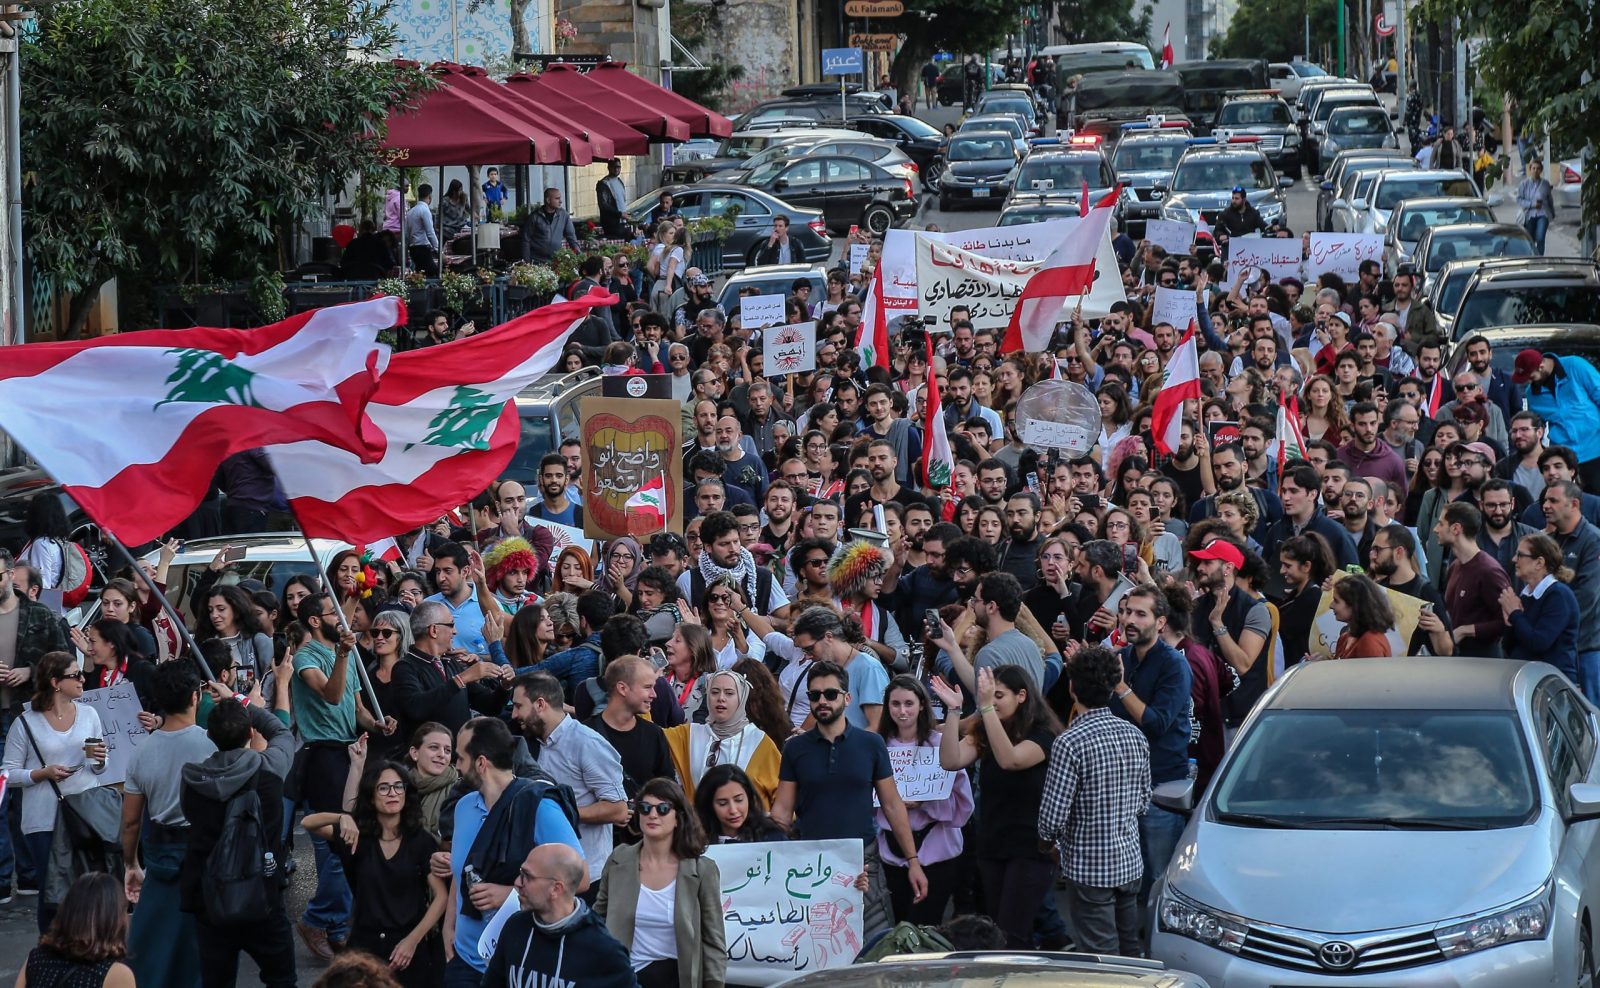 epa08037553 Protesters carry placards against sectarianism and shout slogans against the civil war during an anti-government protest as they march from Beirut Museum toward Martyr Square in Beirut, Lebanon, 01 December 2019. Protests in Lebanon are continuing since first erupted on 17 October, as protesters aim to apply pressure on the country's political leaders over what they view as a lack of progress following the prime minister's resignation on 29 October.  EPA/NABIL MOUNZER